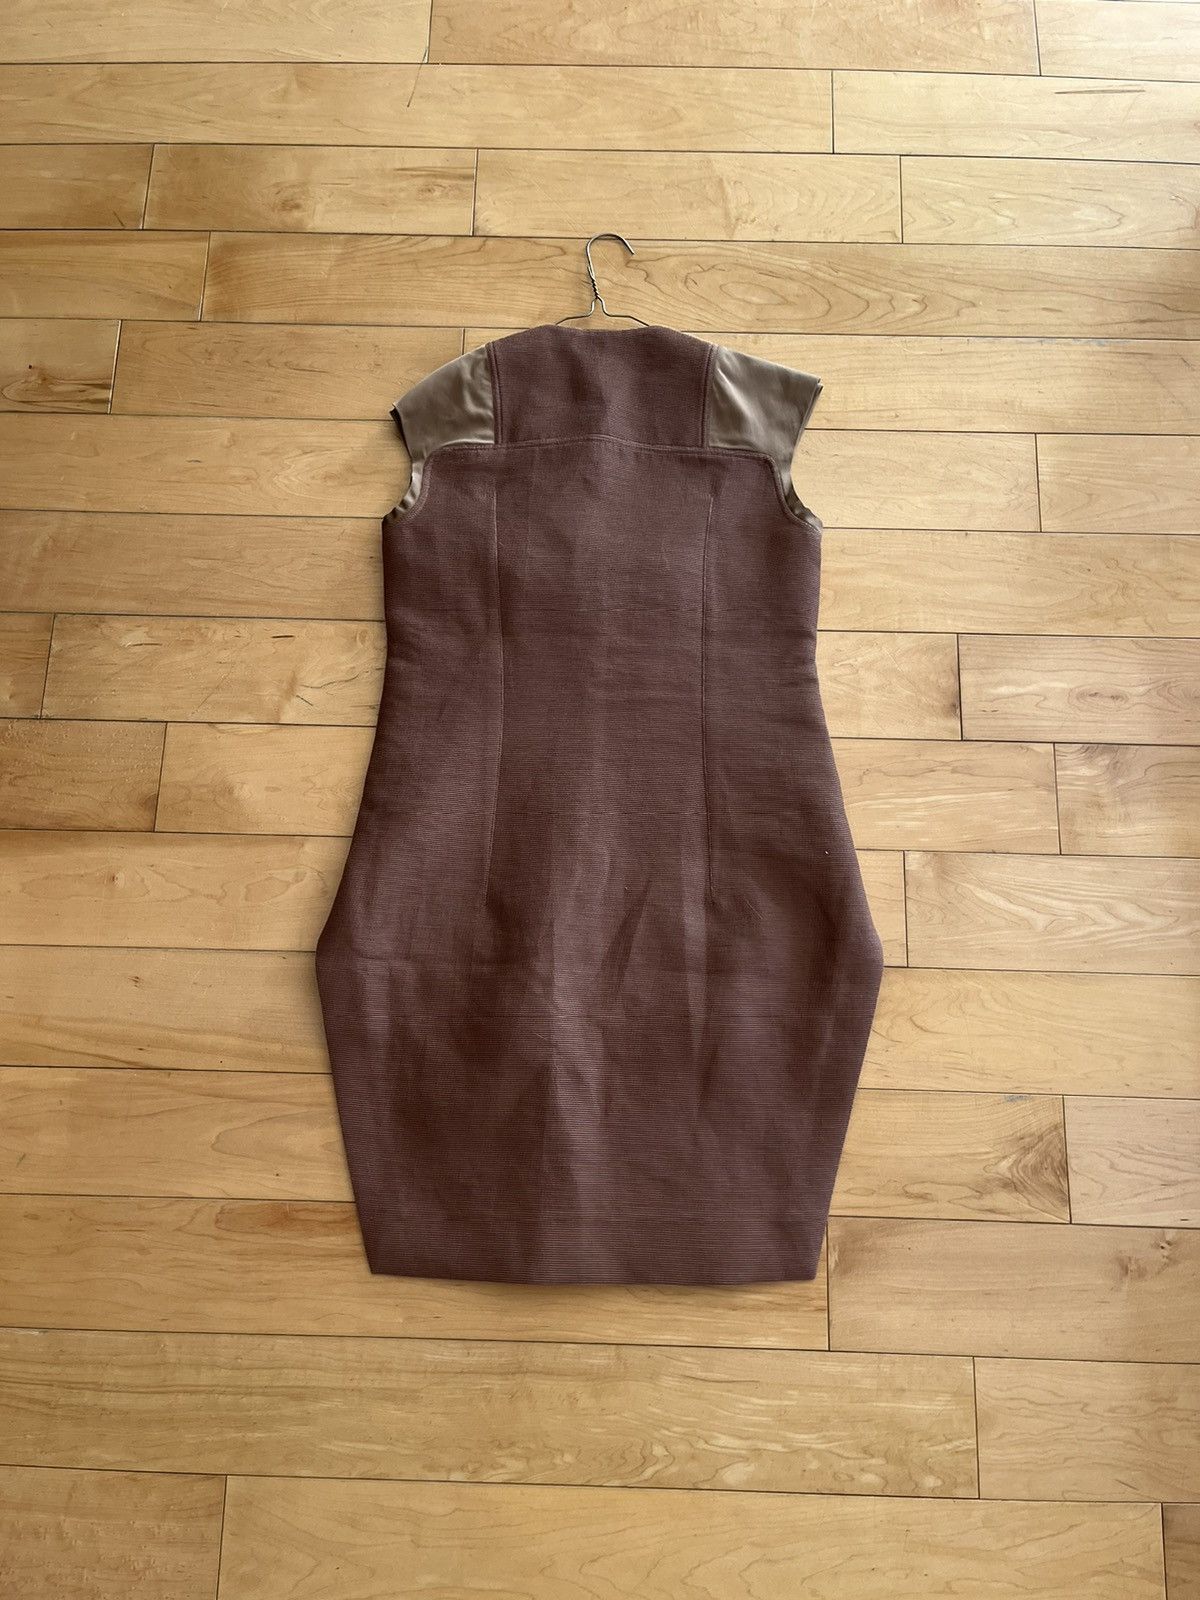 NWT - Rick Owens SS15 Sienna Duster Vest - 2